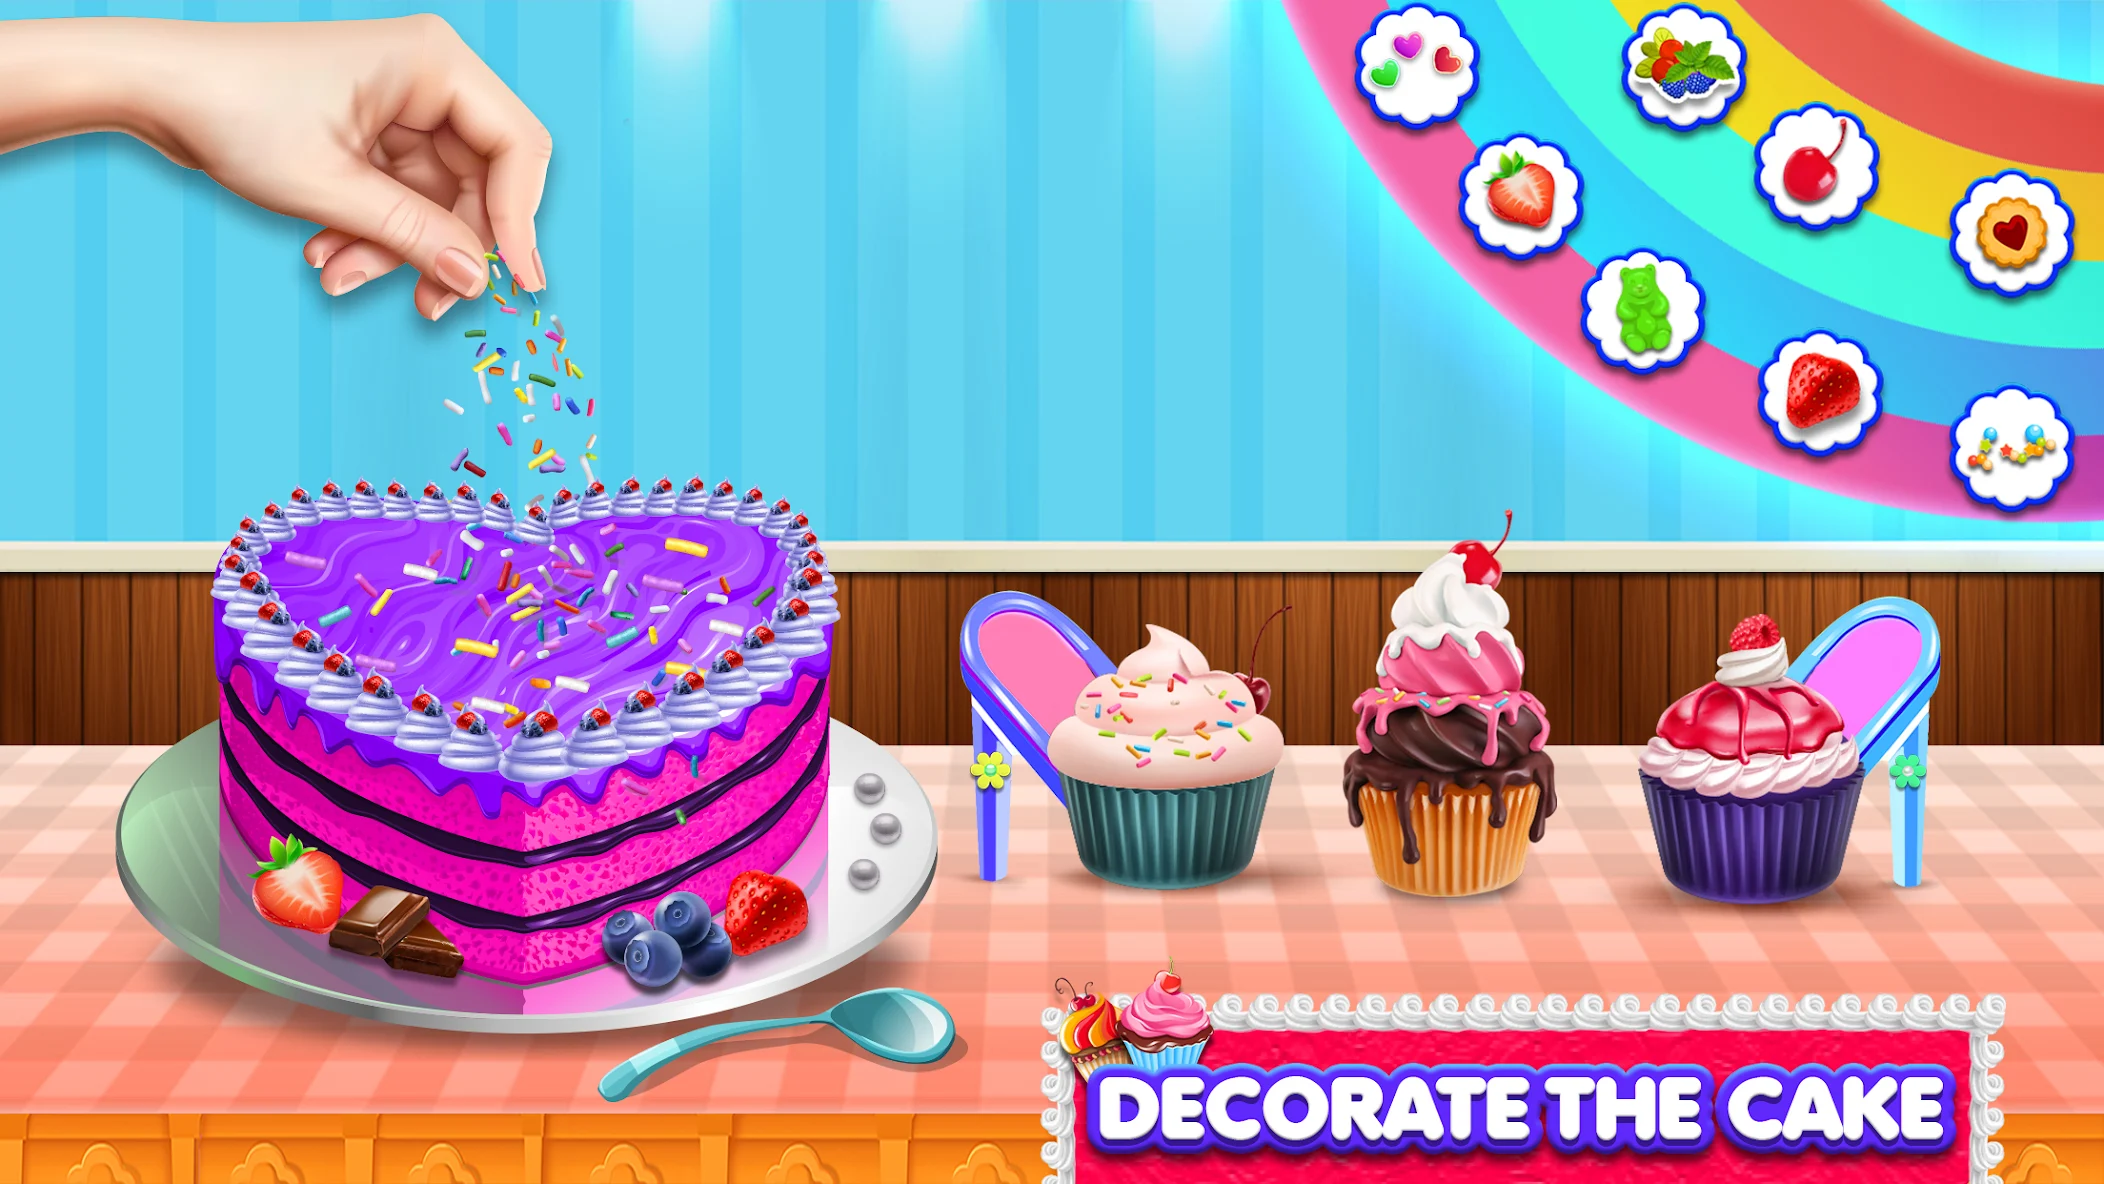 Fun 3D Cake Cooking Game - My Bakery Empire Color, Decorate & Serve Cakes -  The Love Hearts Cake - YouTube